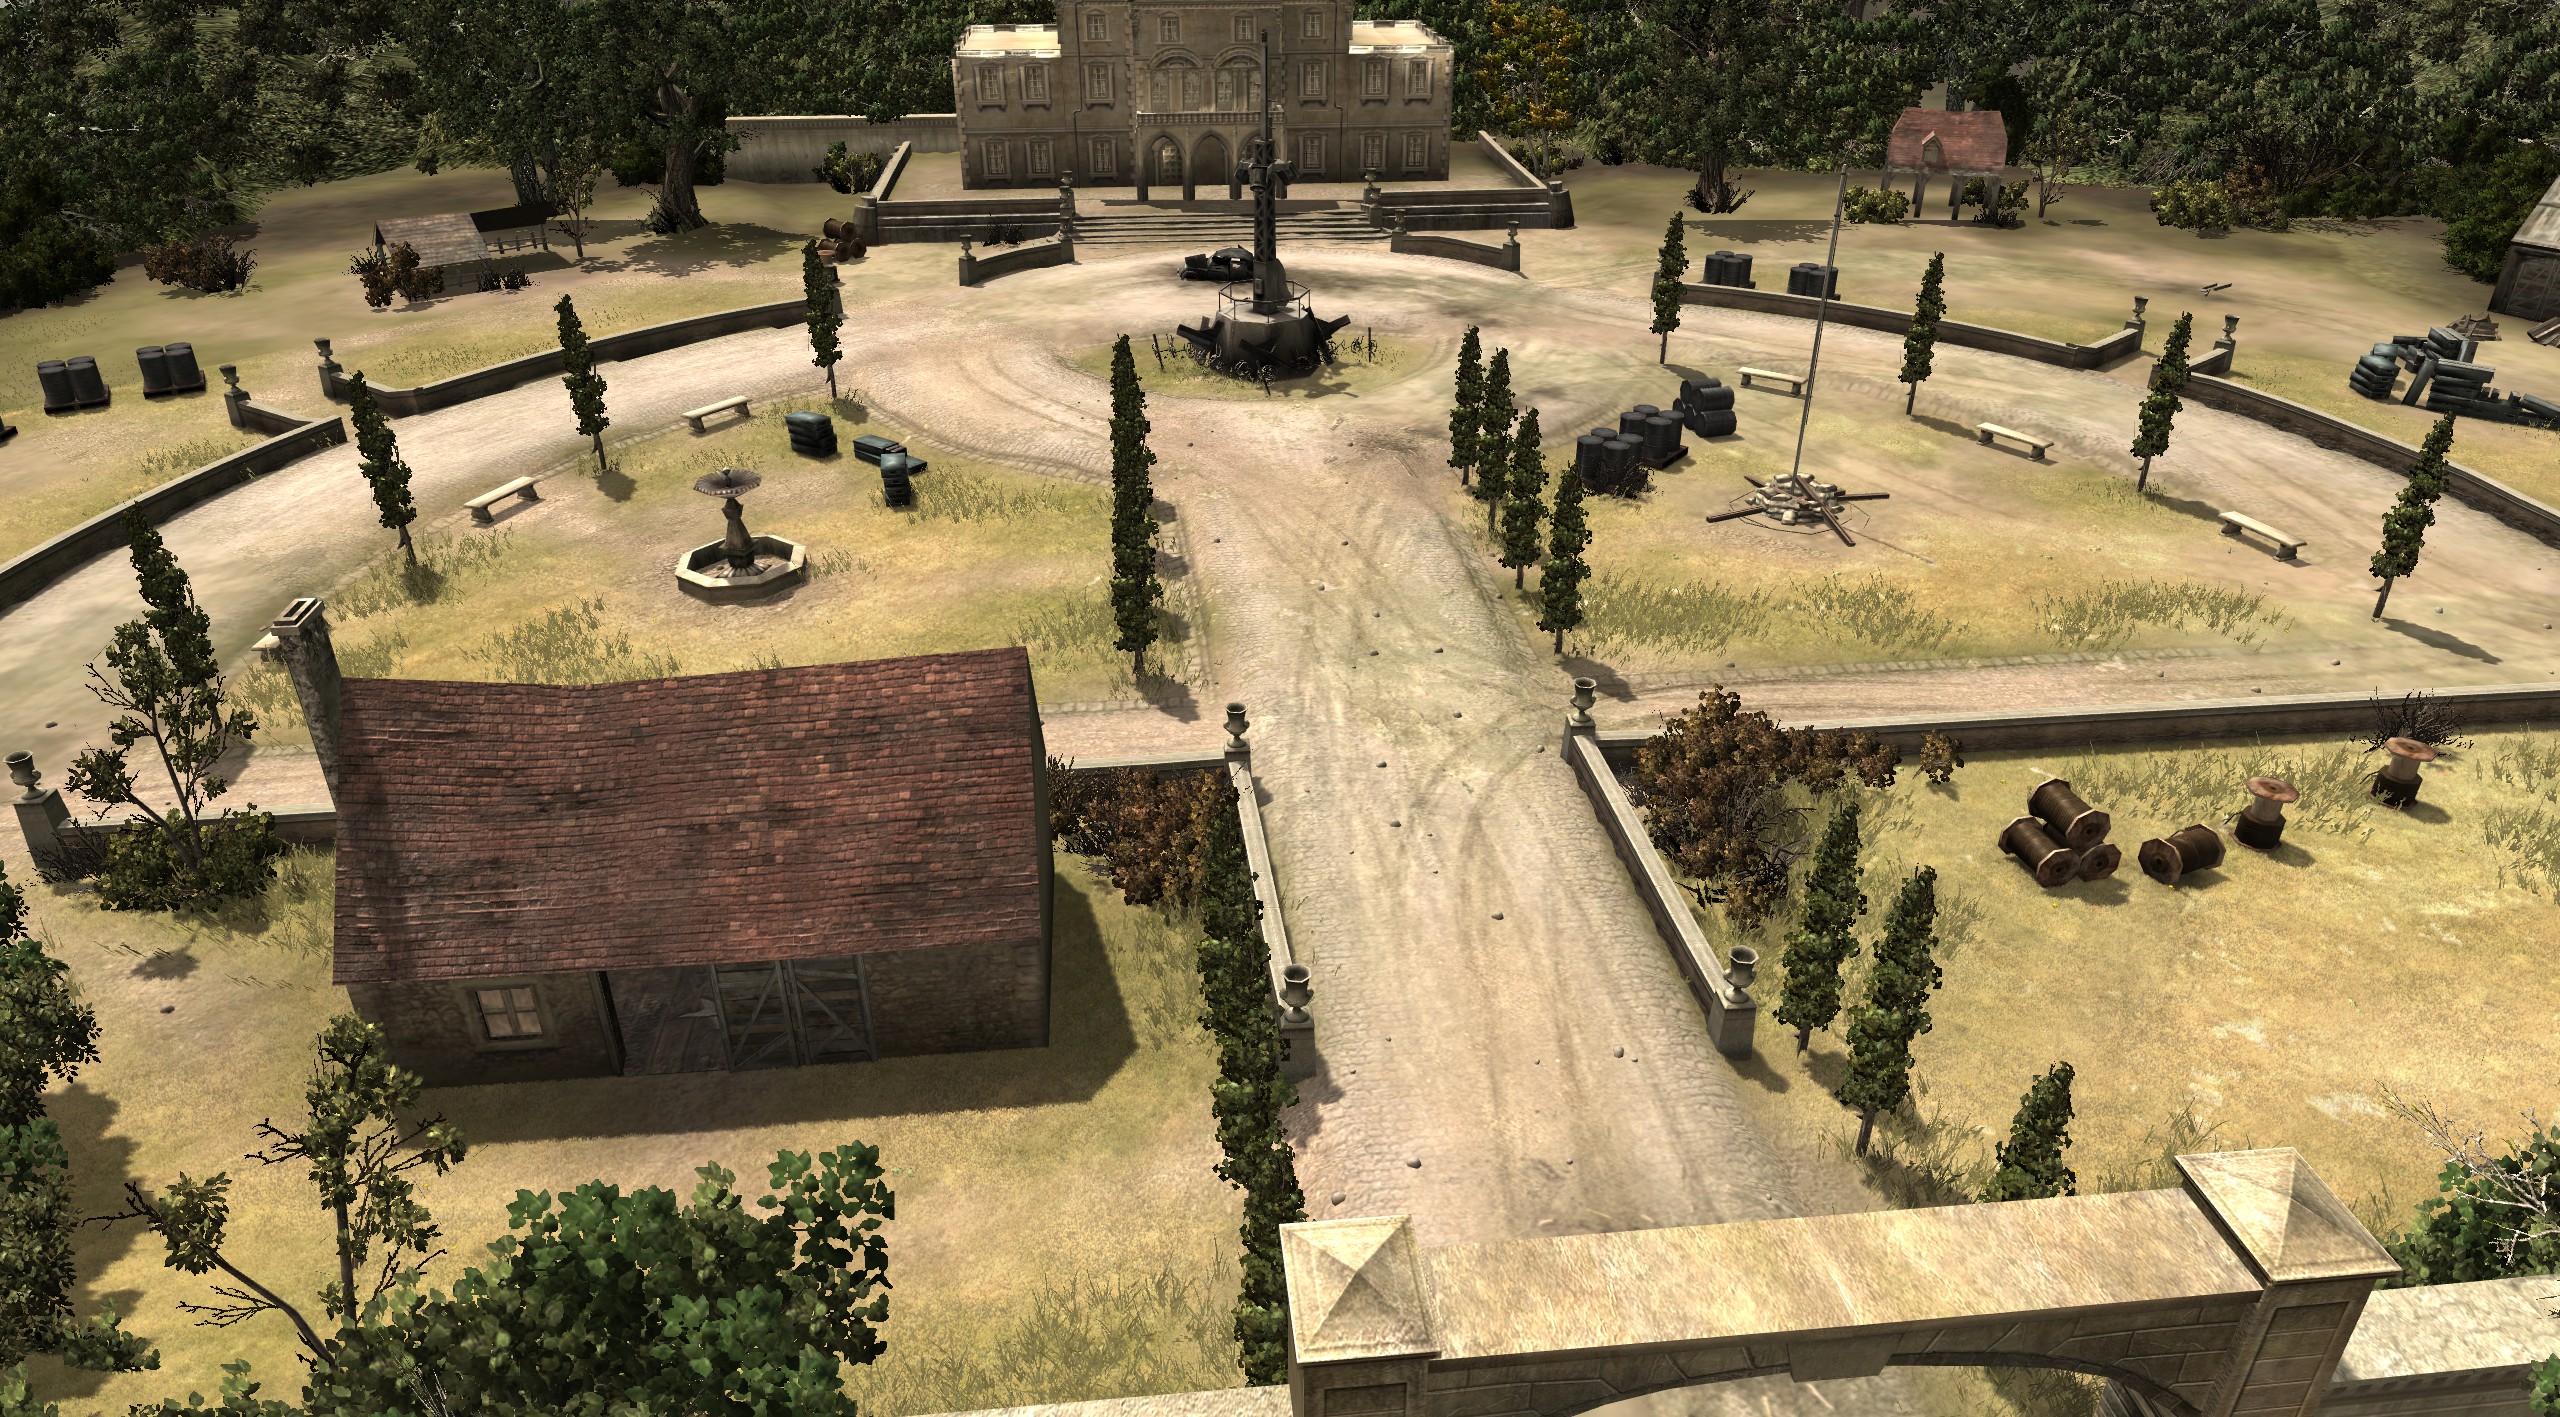 The Northern Victory Point - a really neat little mansion grounds inspired by places like the château of Versailles.